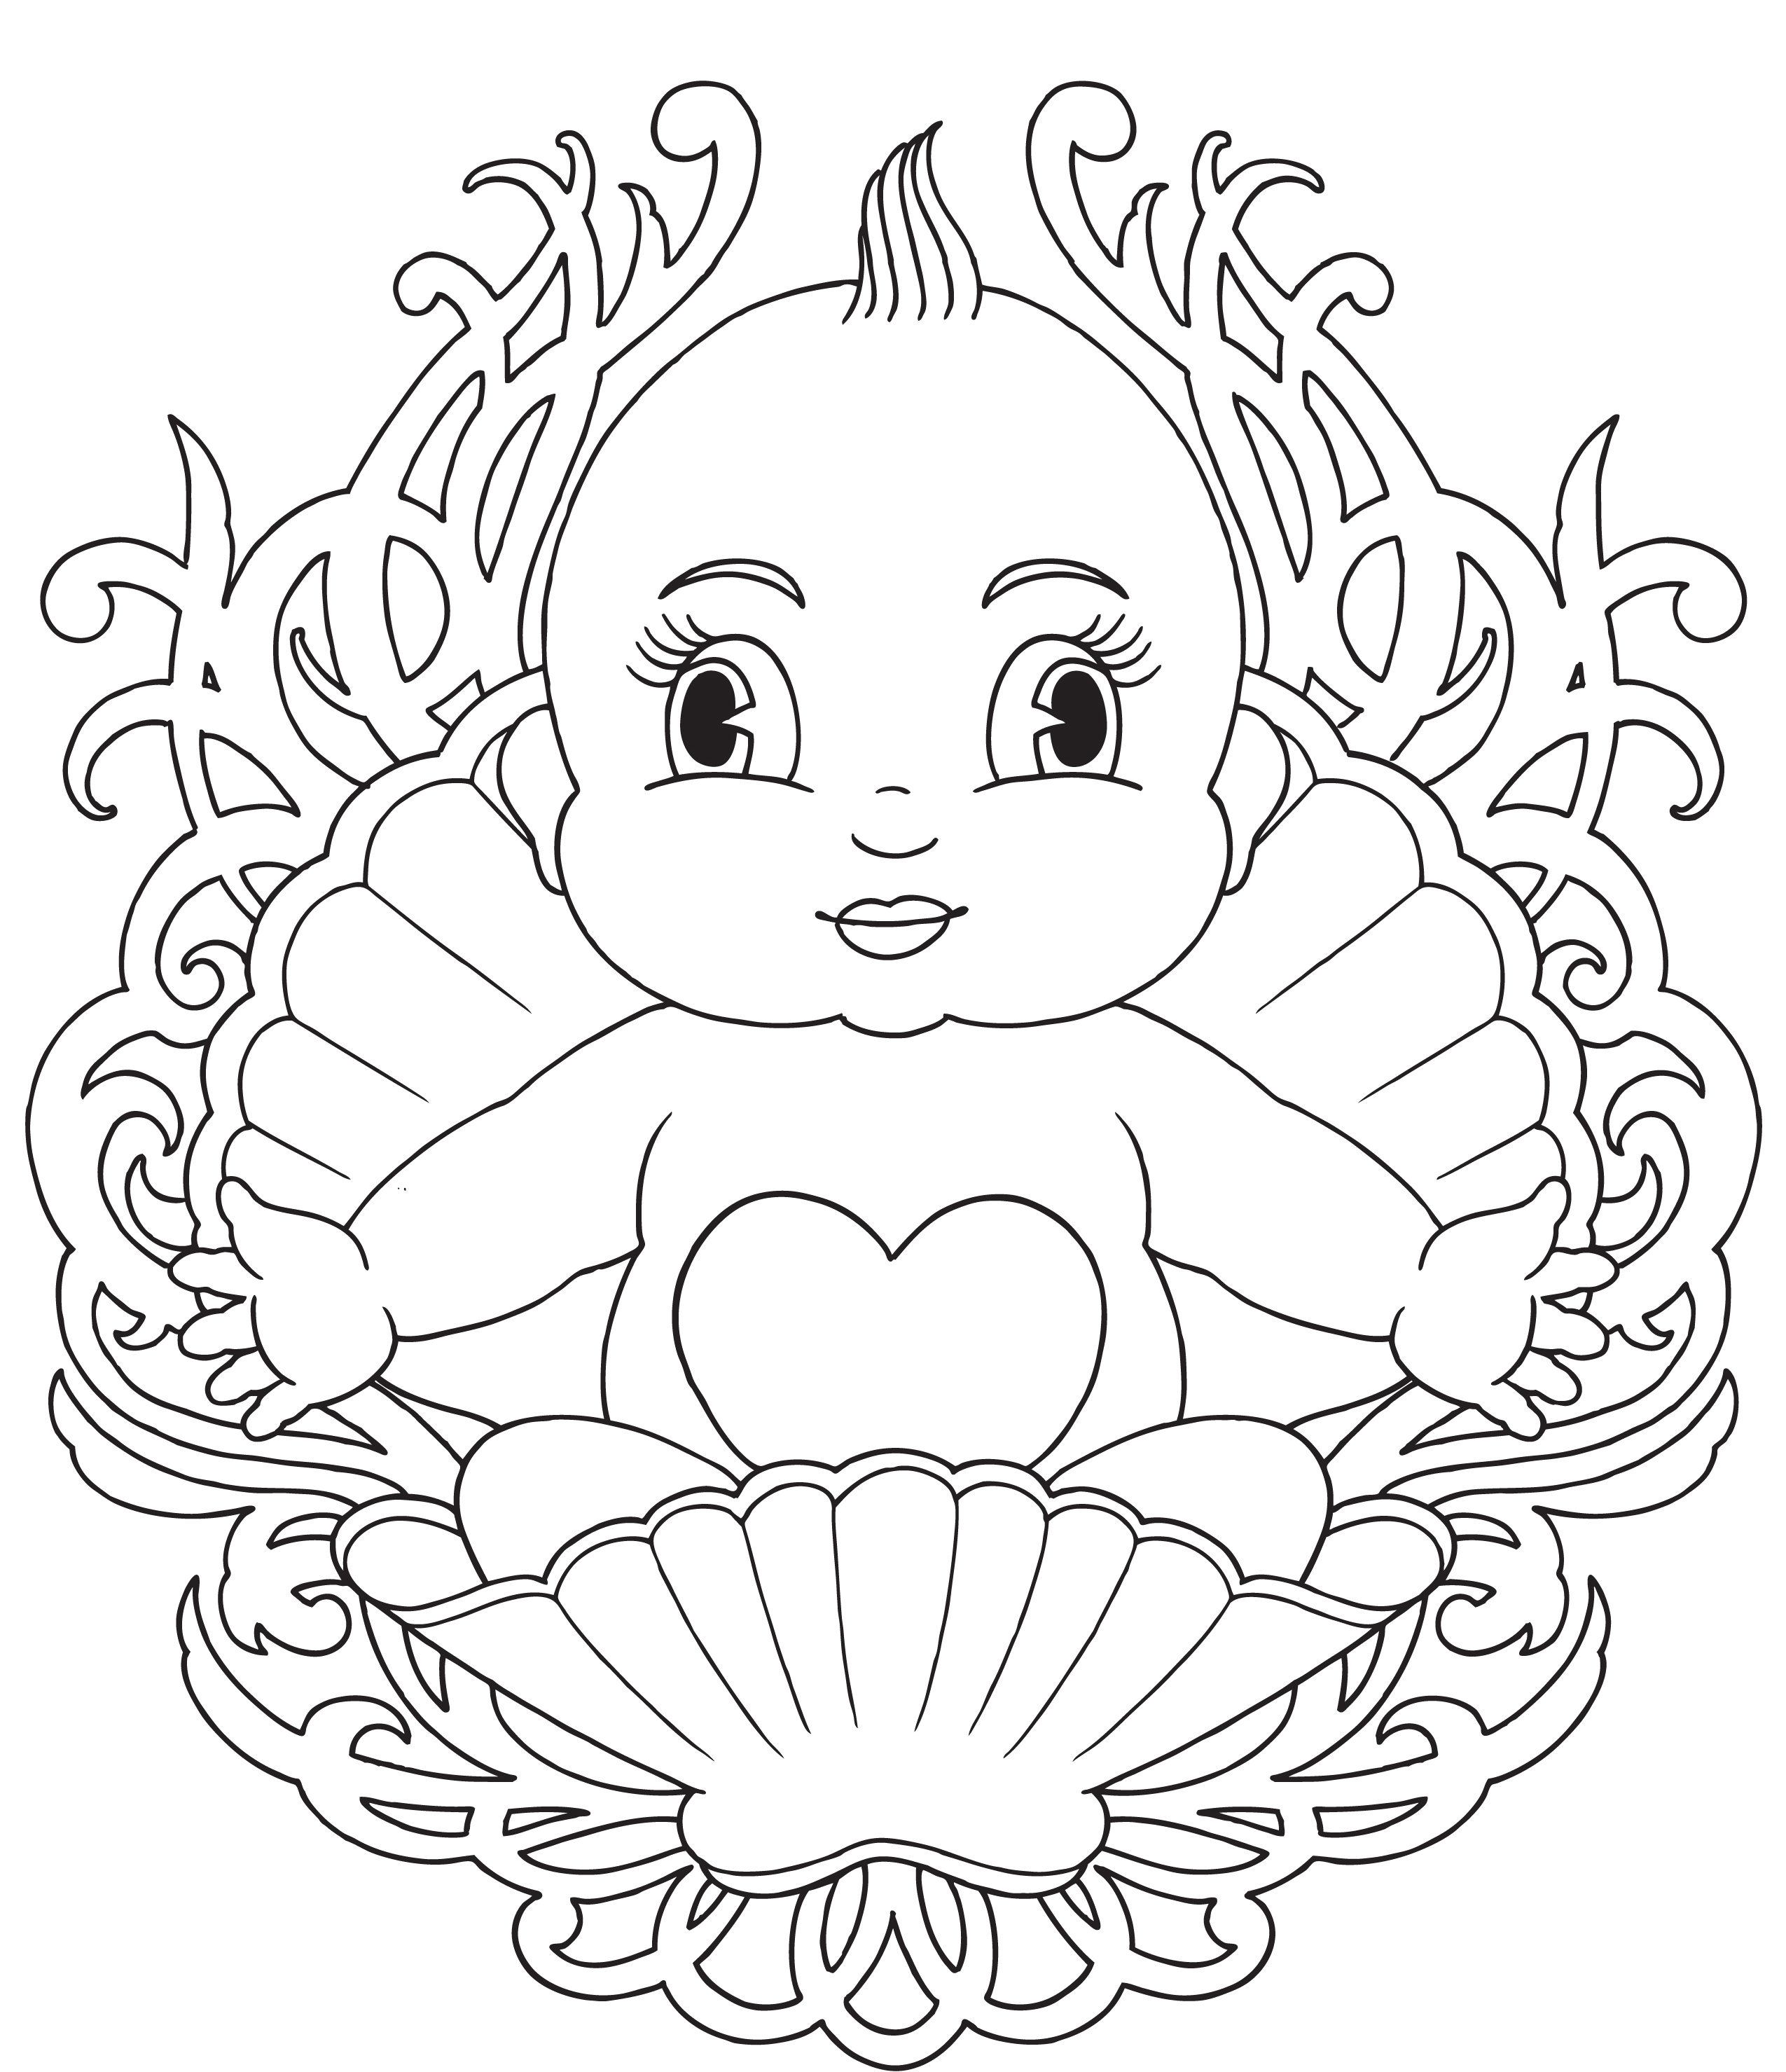 Baby Colouring In Hotsell, 20 OFF   www.hcb.cat